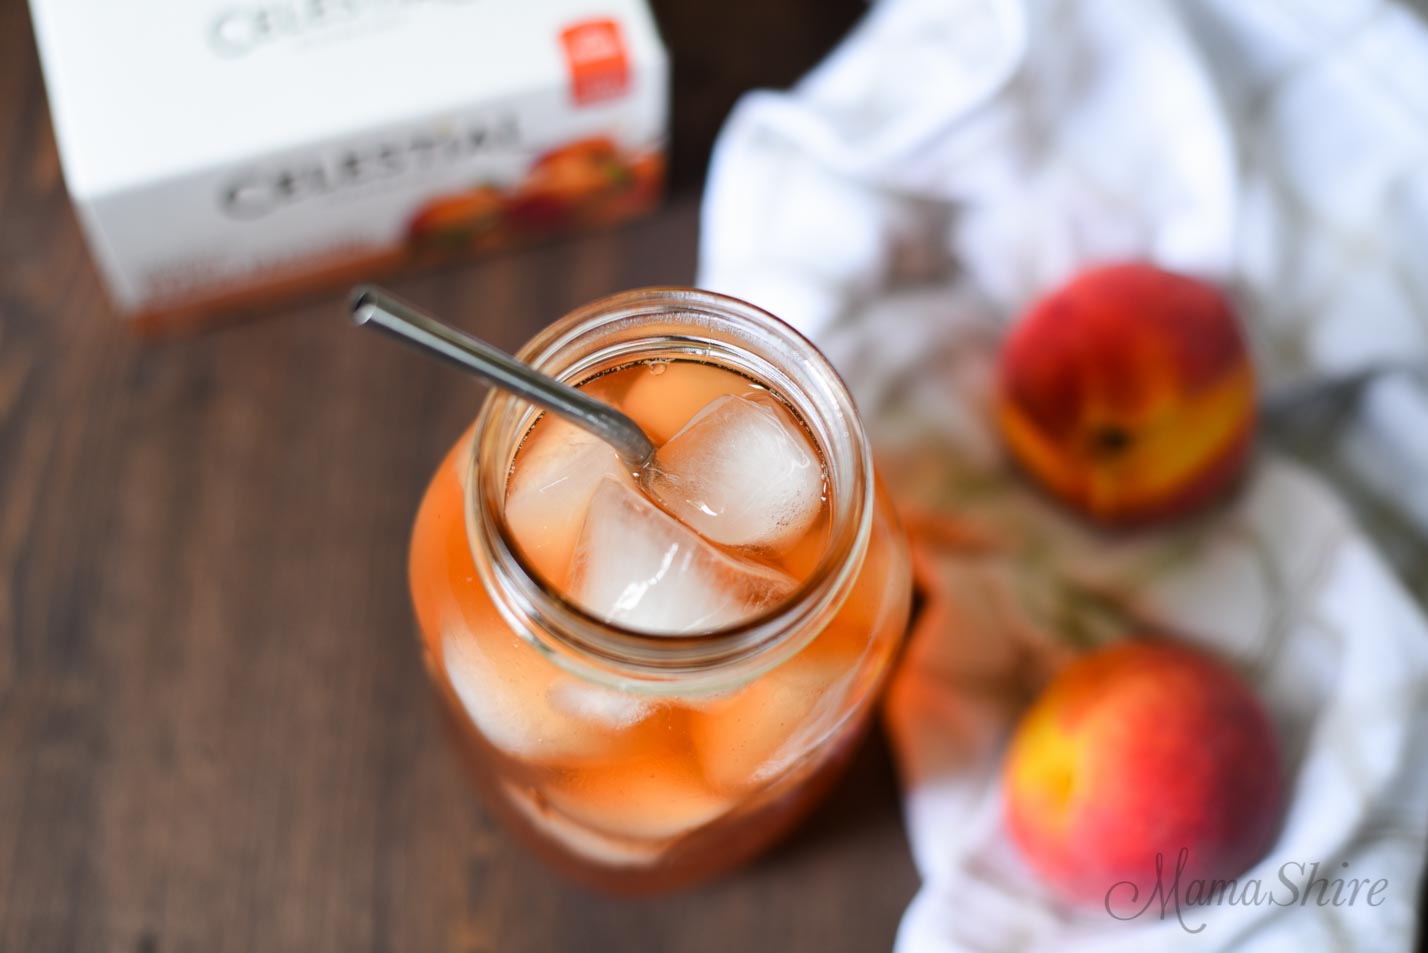 What's a well-rated recipe for peach moonshine?